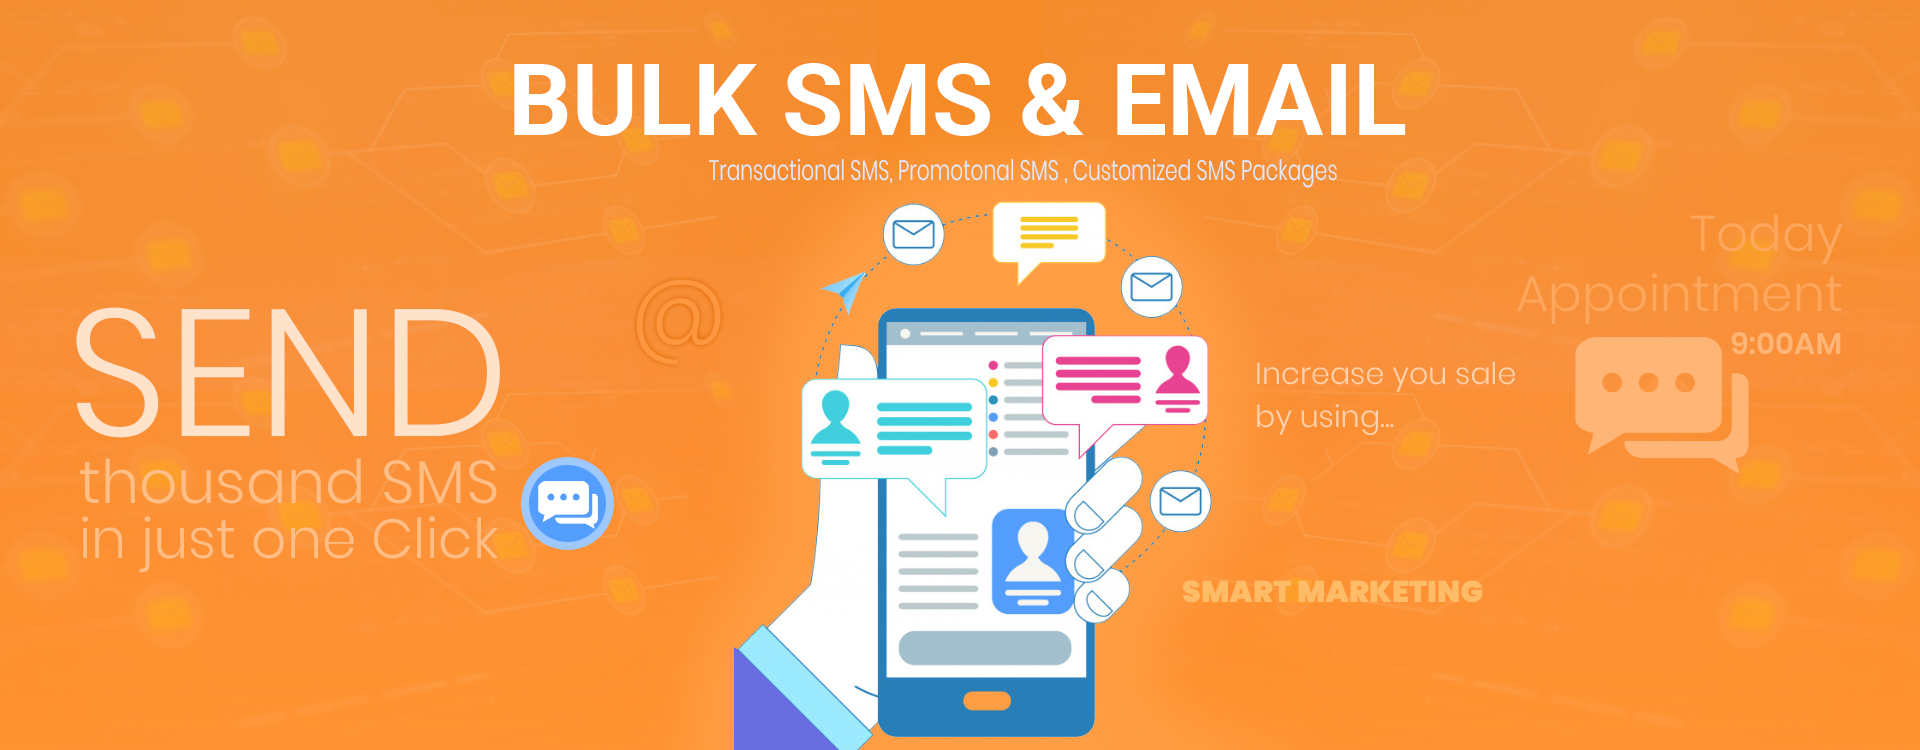 bulk sms and email